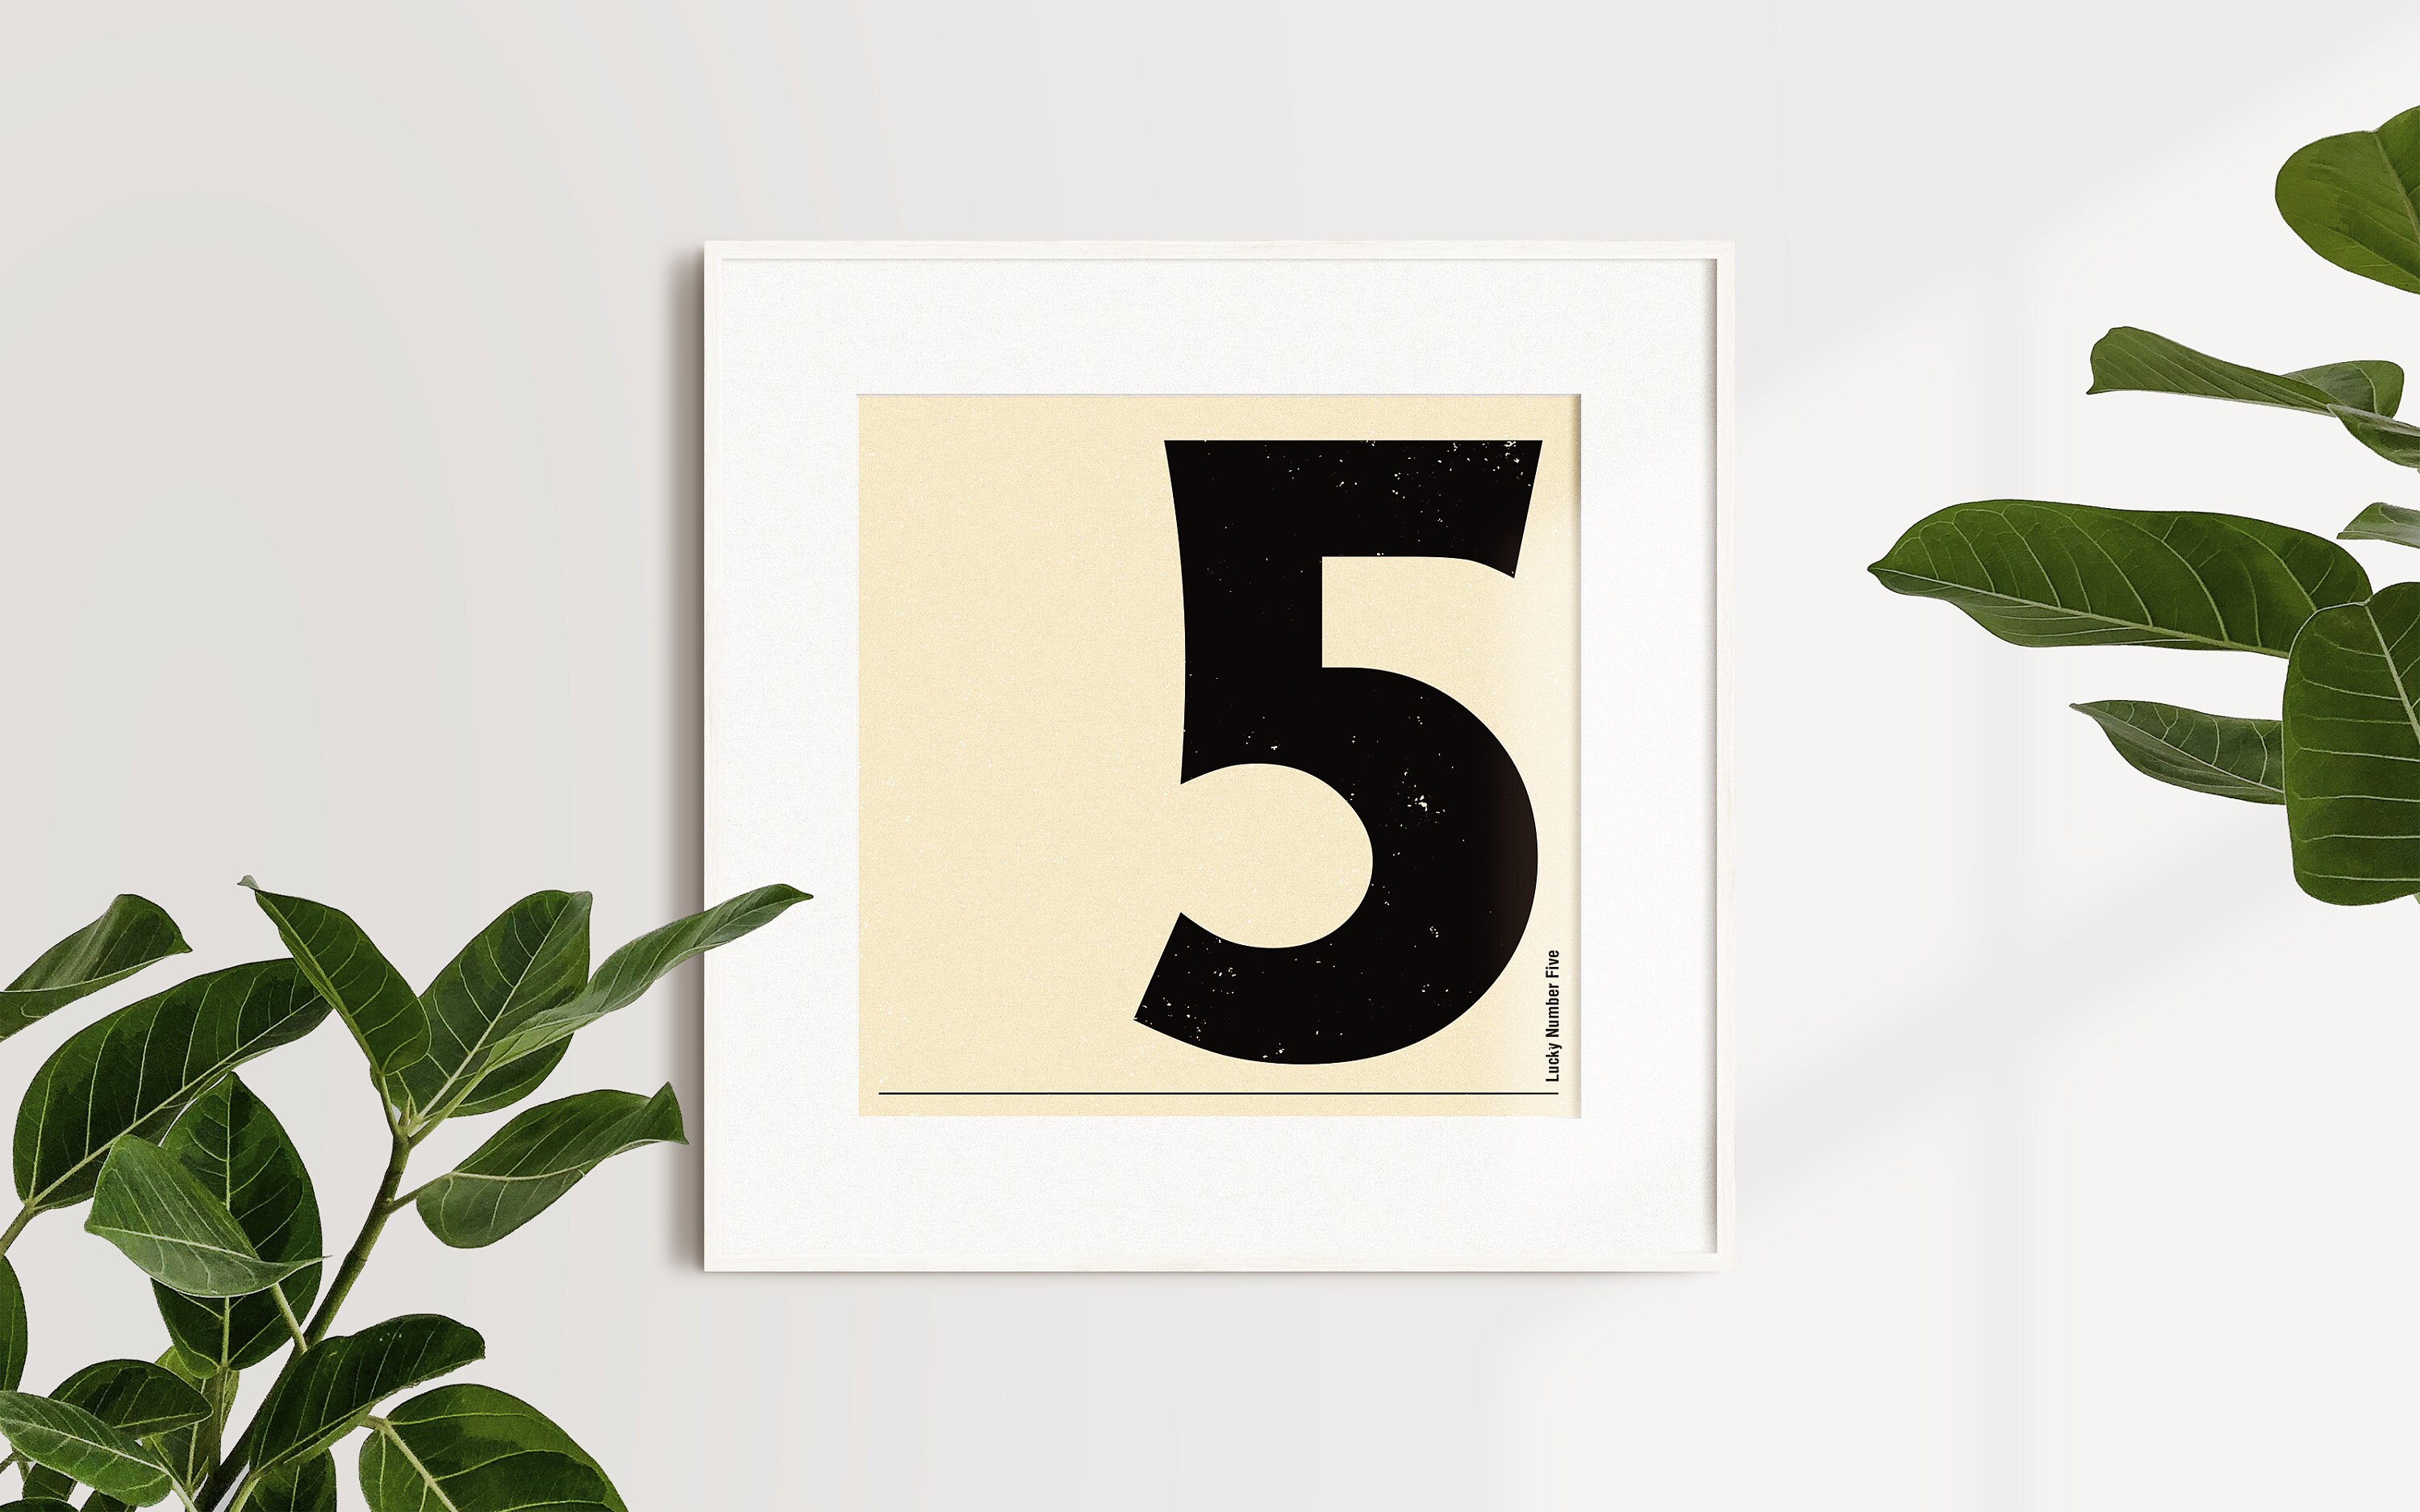 Number five Print, Number 5, 5 Print, Number 5 Art, Printable Number Art,  Number Wall Decor, Black and White Number 5, Minimalist Number